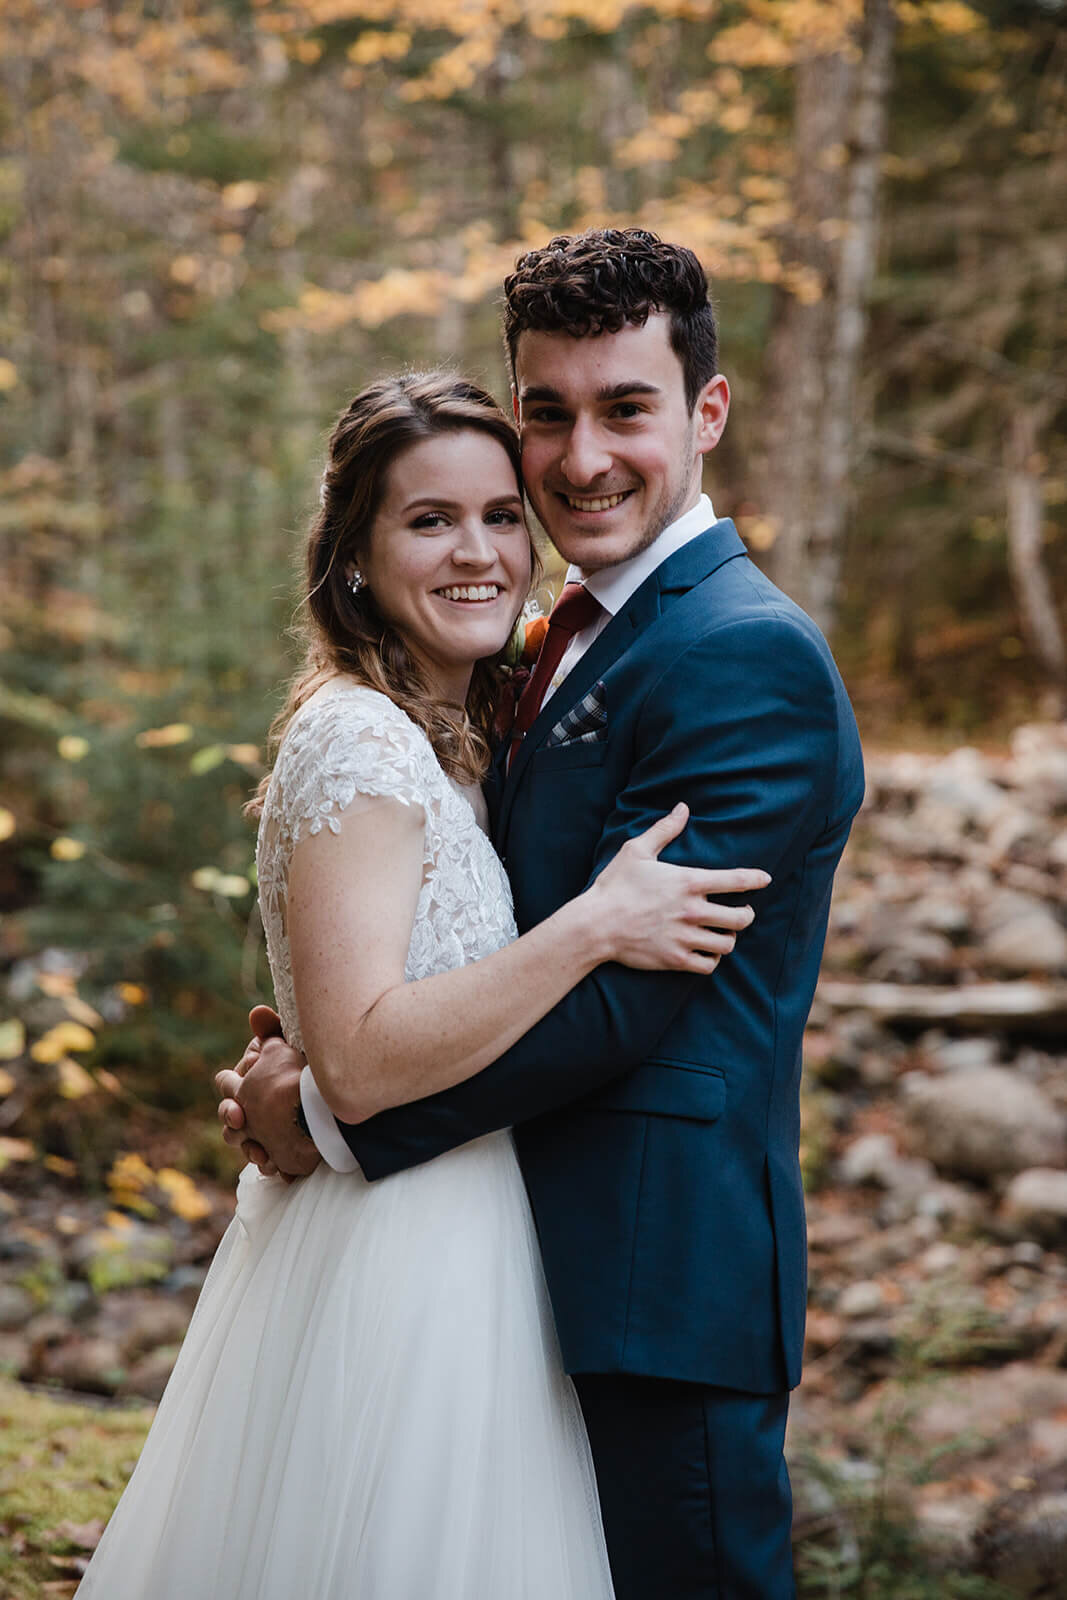  Couple sees each other for the first time during their elopement. Small outdoor wedding in the White Mountains, New Hampshire.  